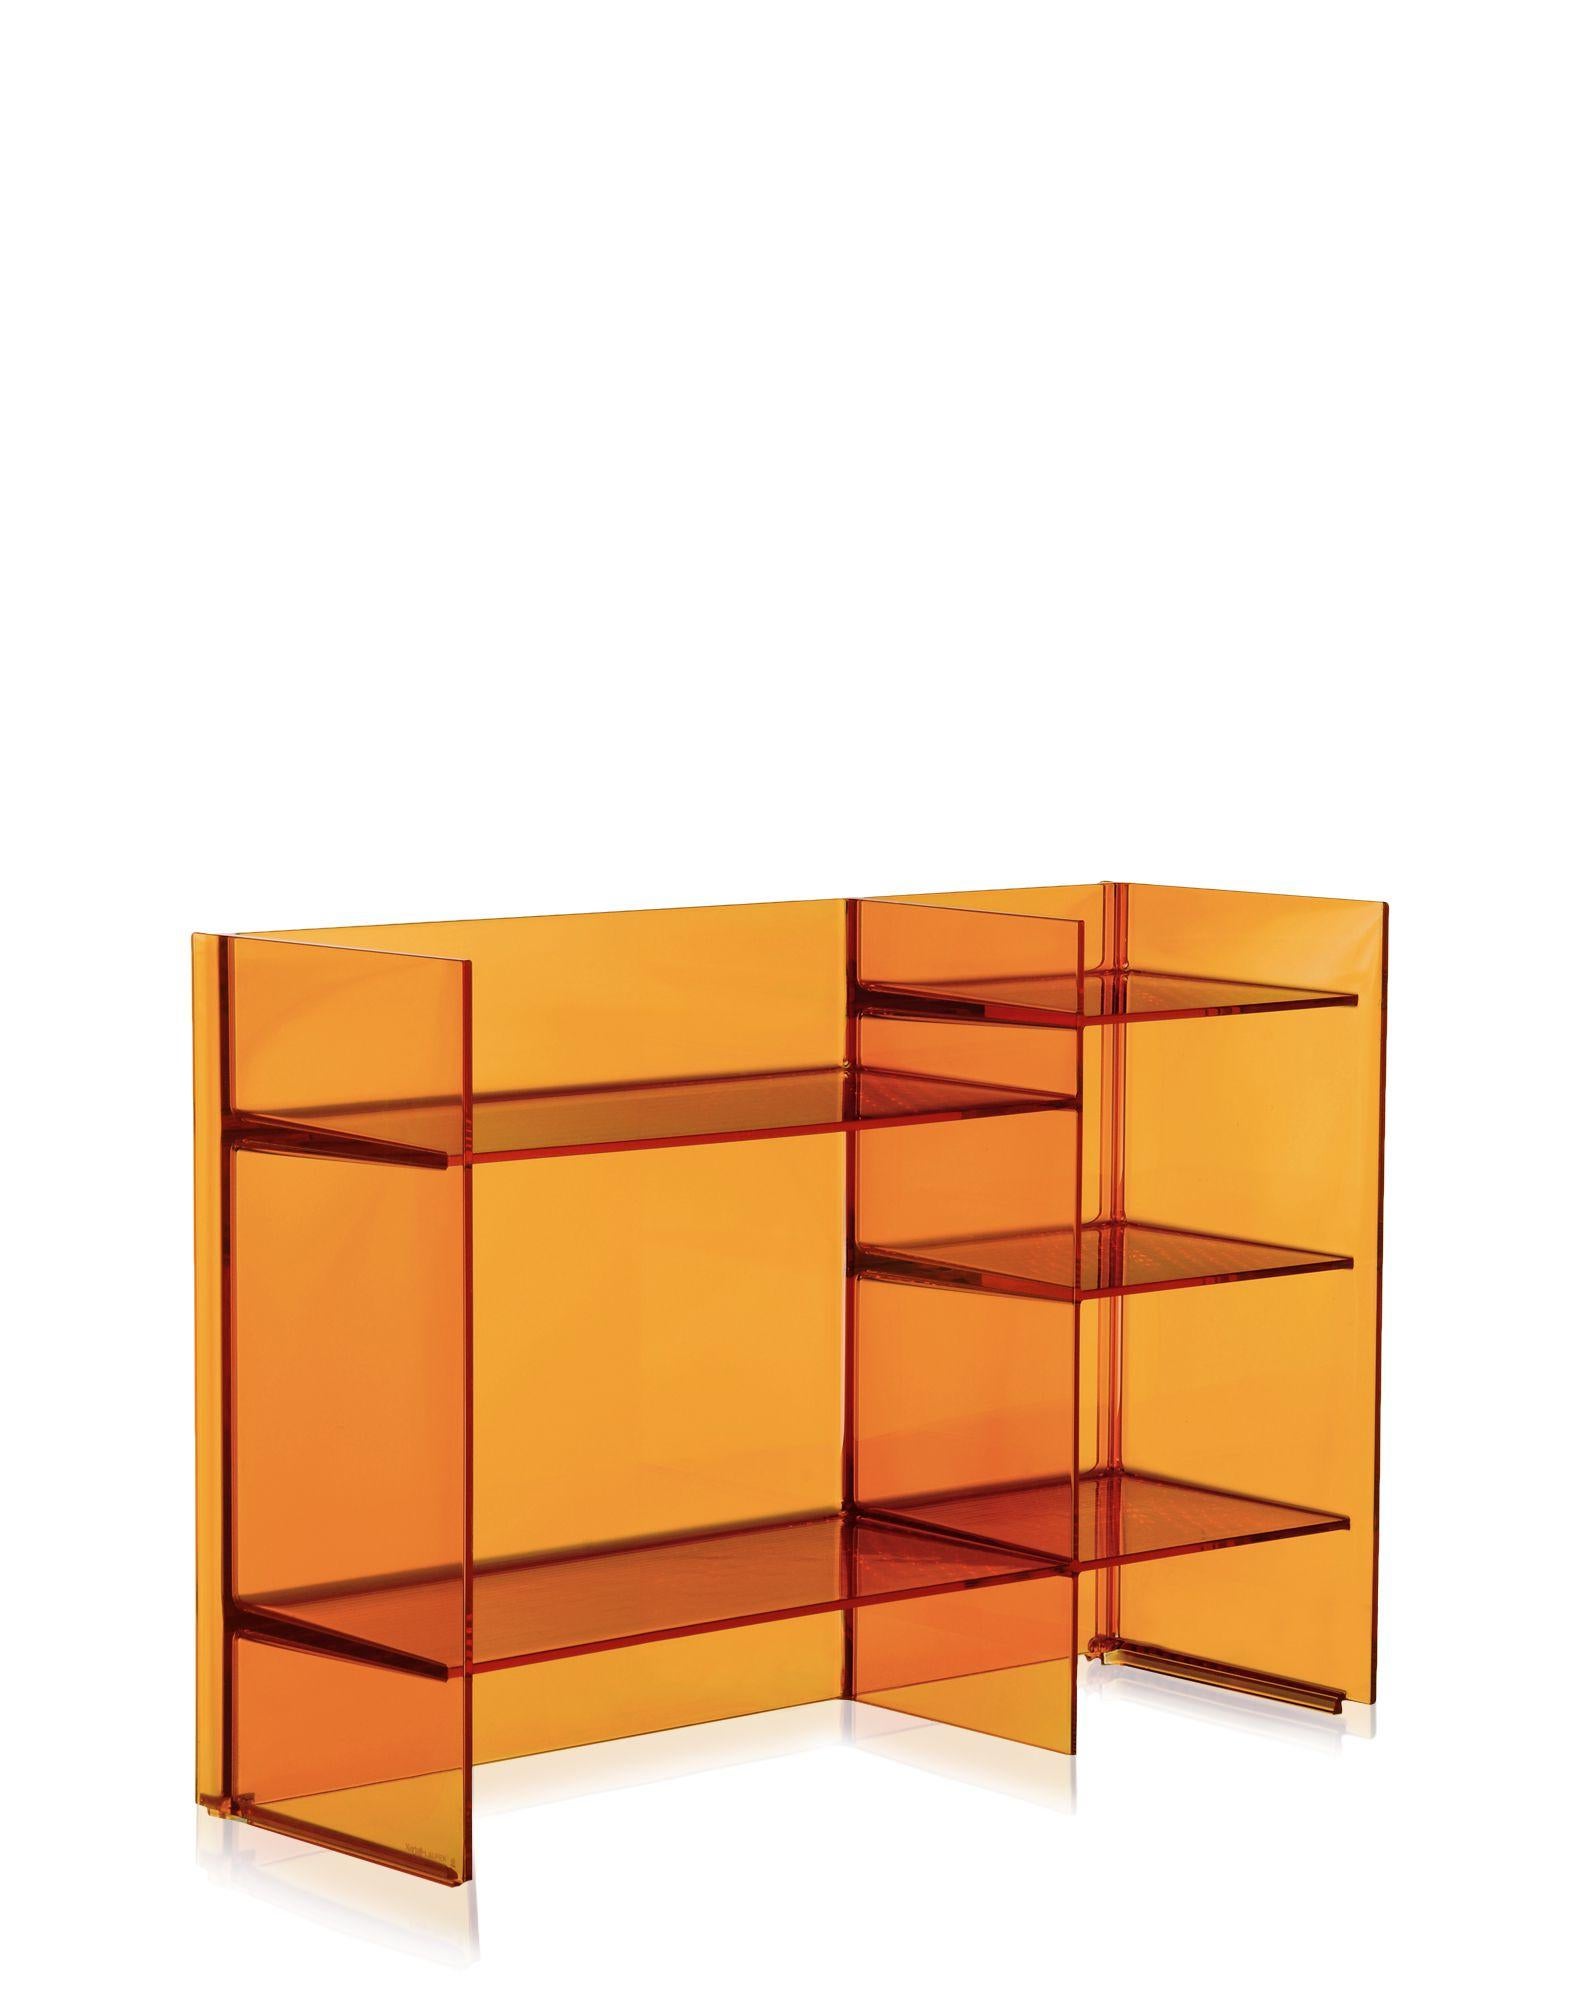 Multi-shaped and multi-purpose shelving system, stackable and modular, offering the possibility of creating a variety of geometric and chromatic compositions. This accessory can play the dual role as both container and room divider. IT IS a